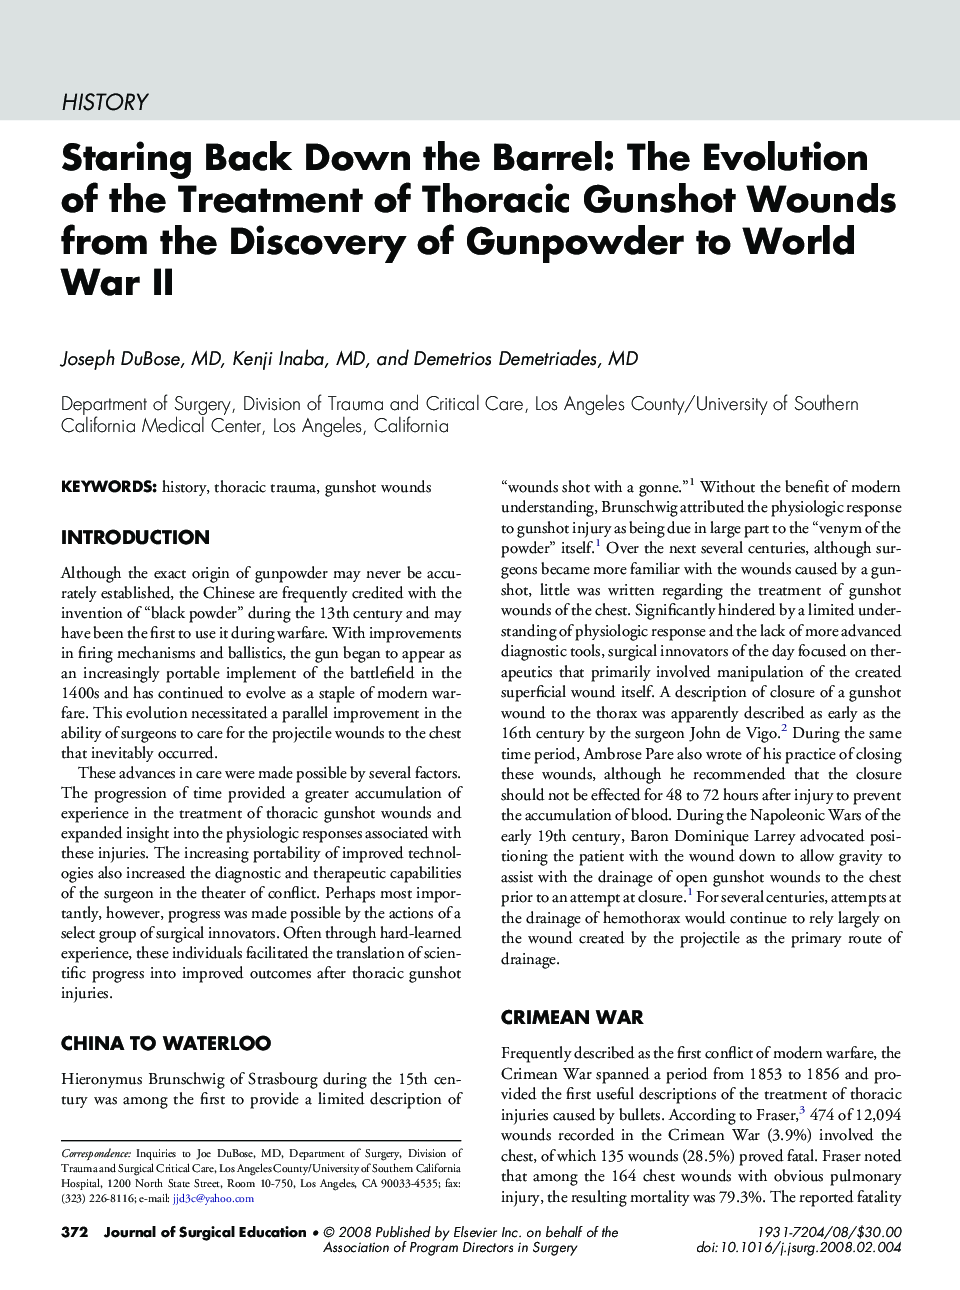 Staring Back Down the Barrel: The Evolution of the Treatment of Thoracic Gunshot Wounds from the Discovery of Gunpowder to World War II